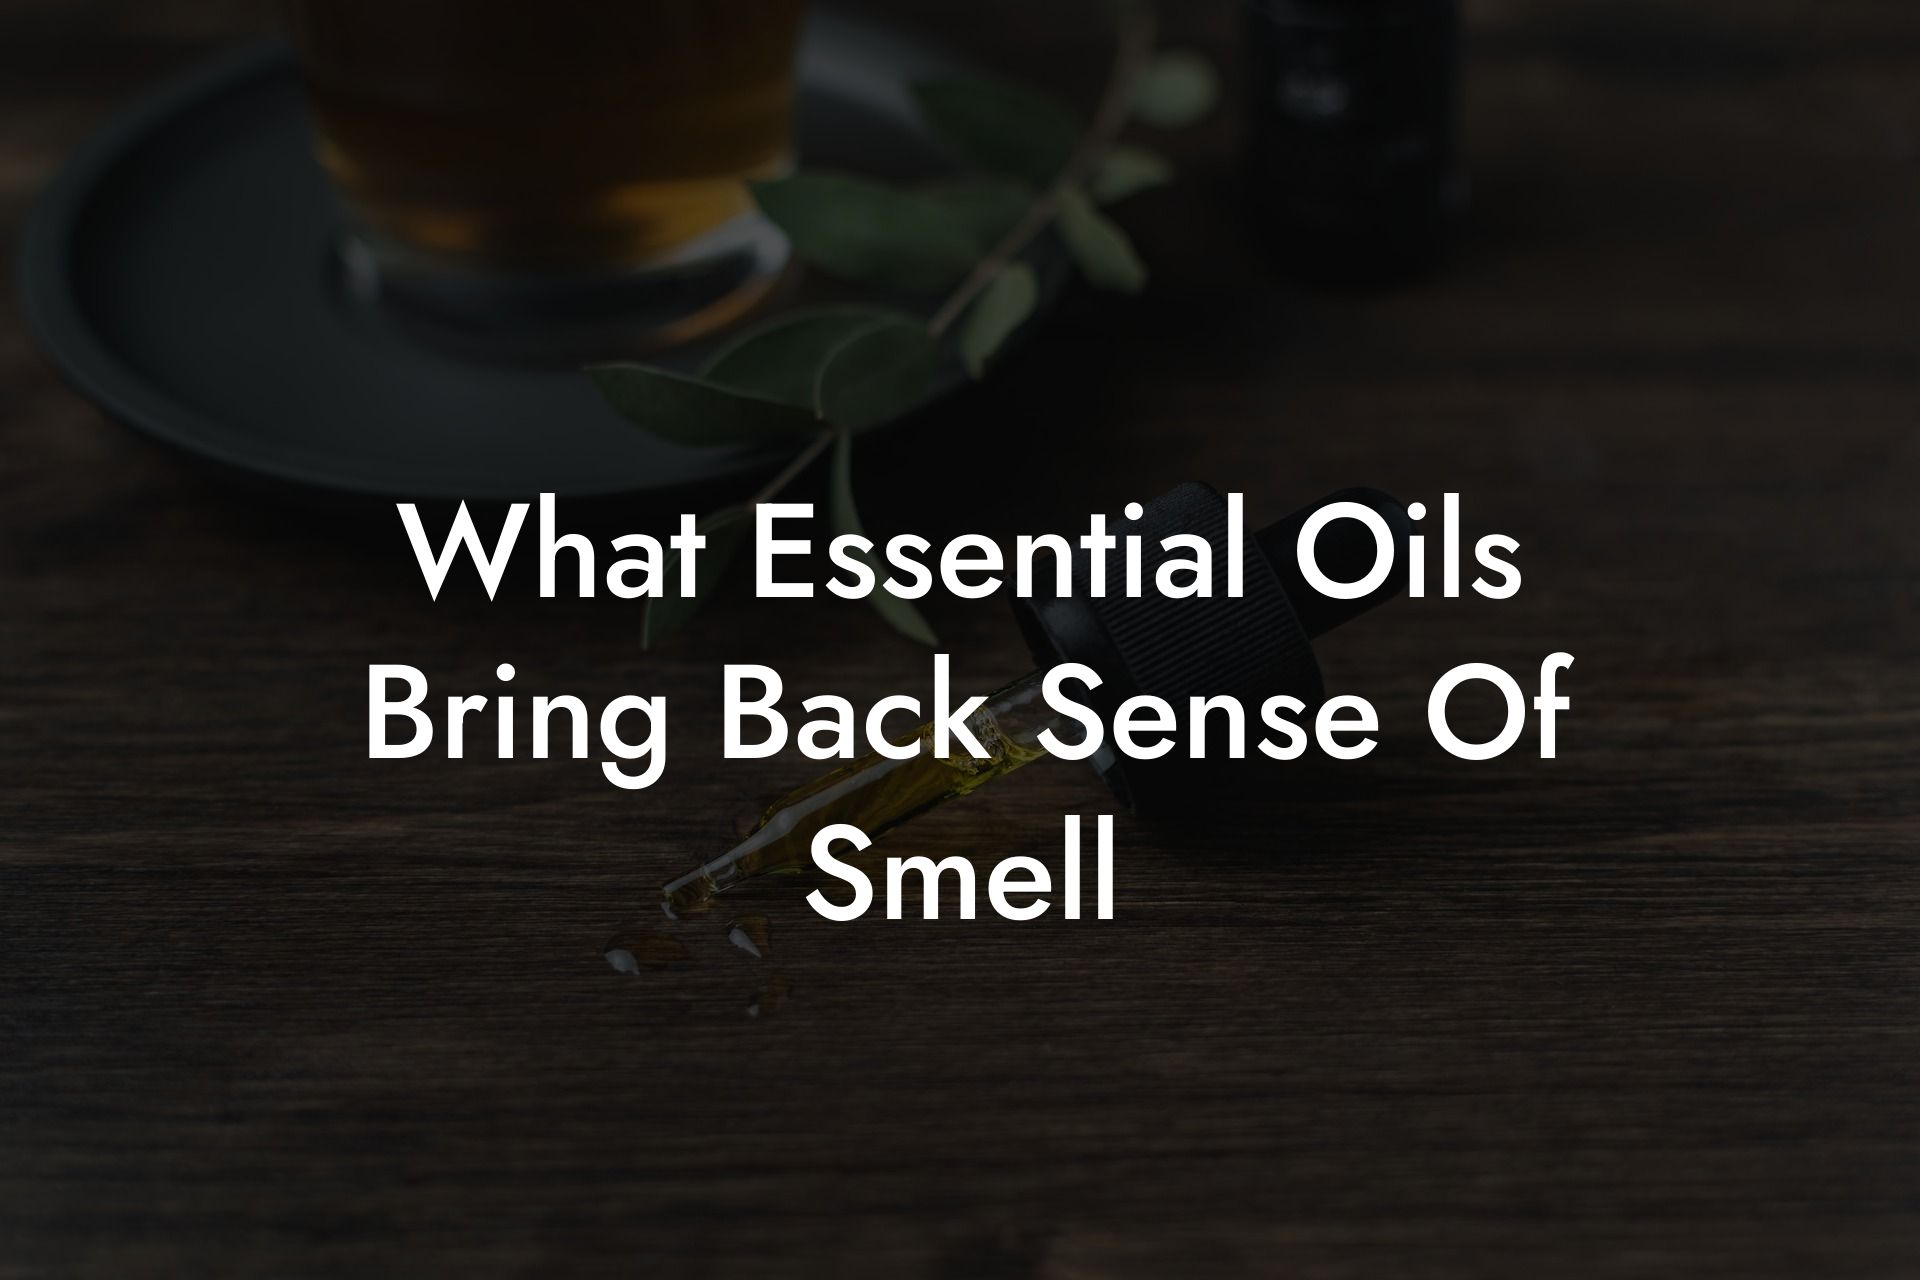 What Essential Oils Bring Back Sense Of Smell